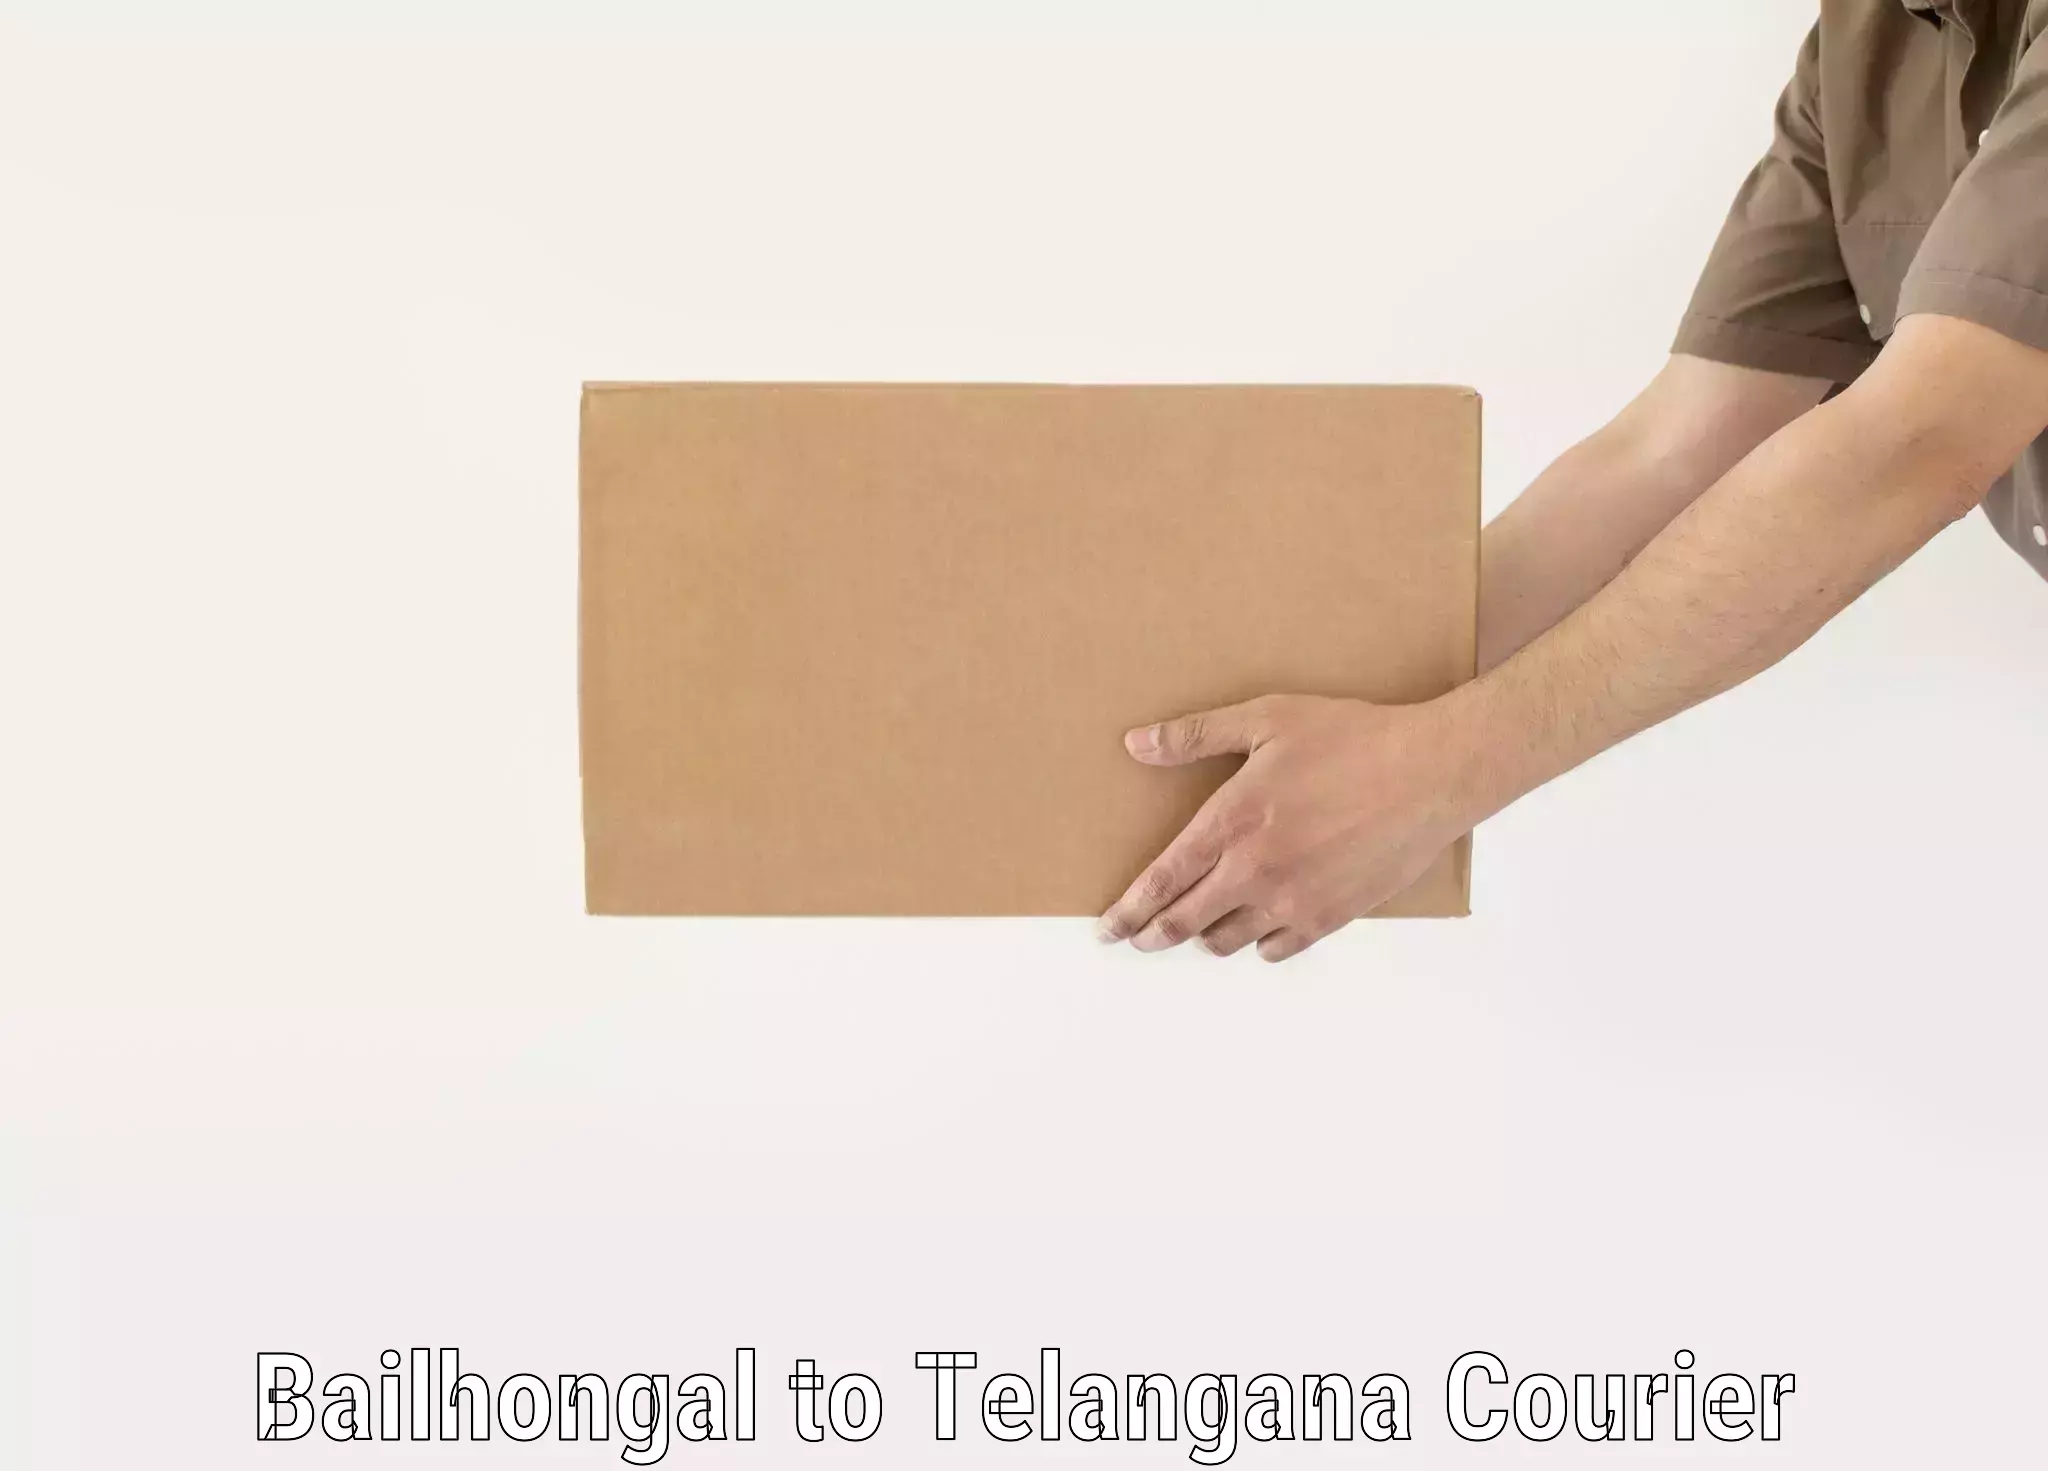 Luggage delivery providers Bailhongal to Telangana